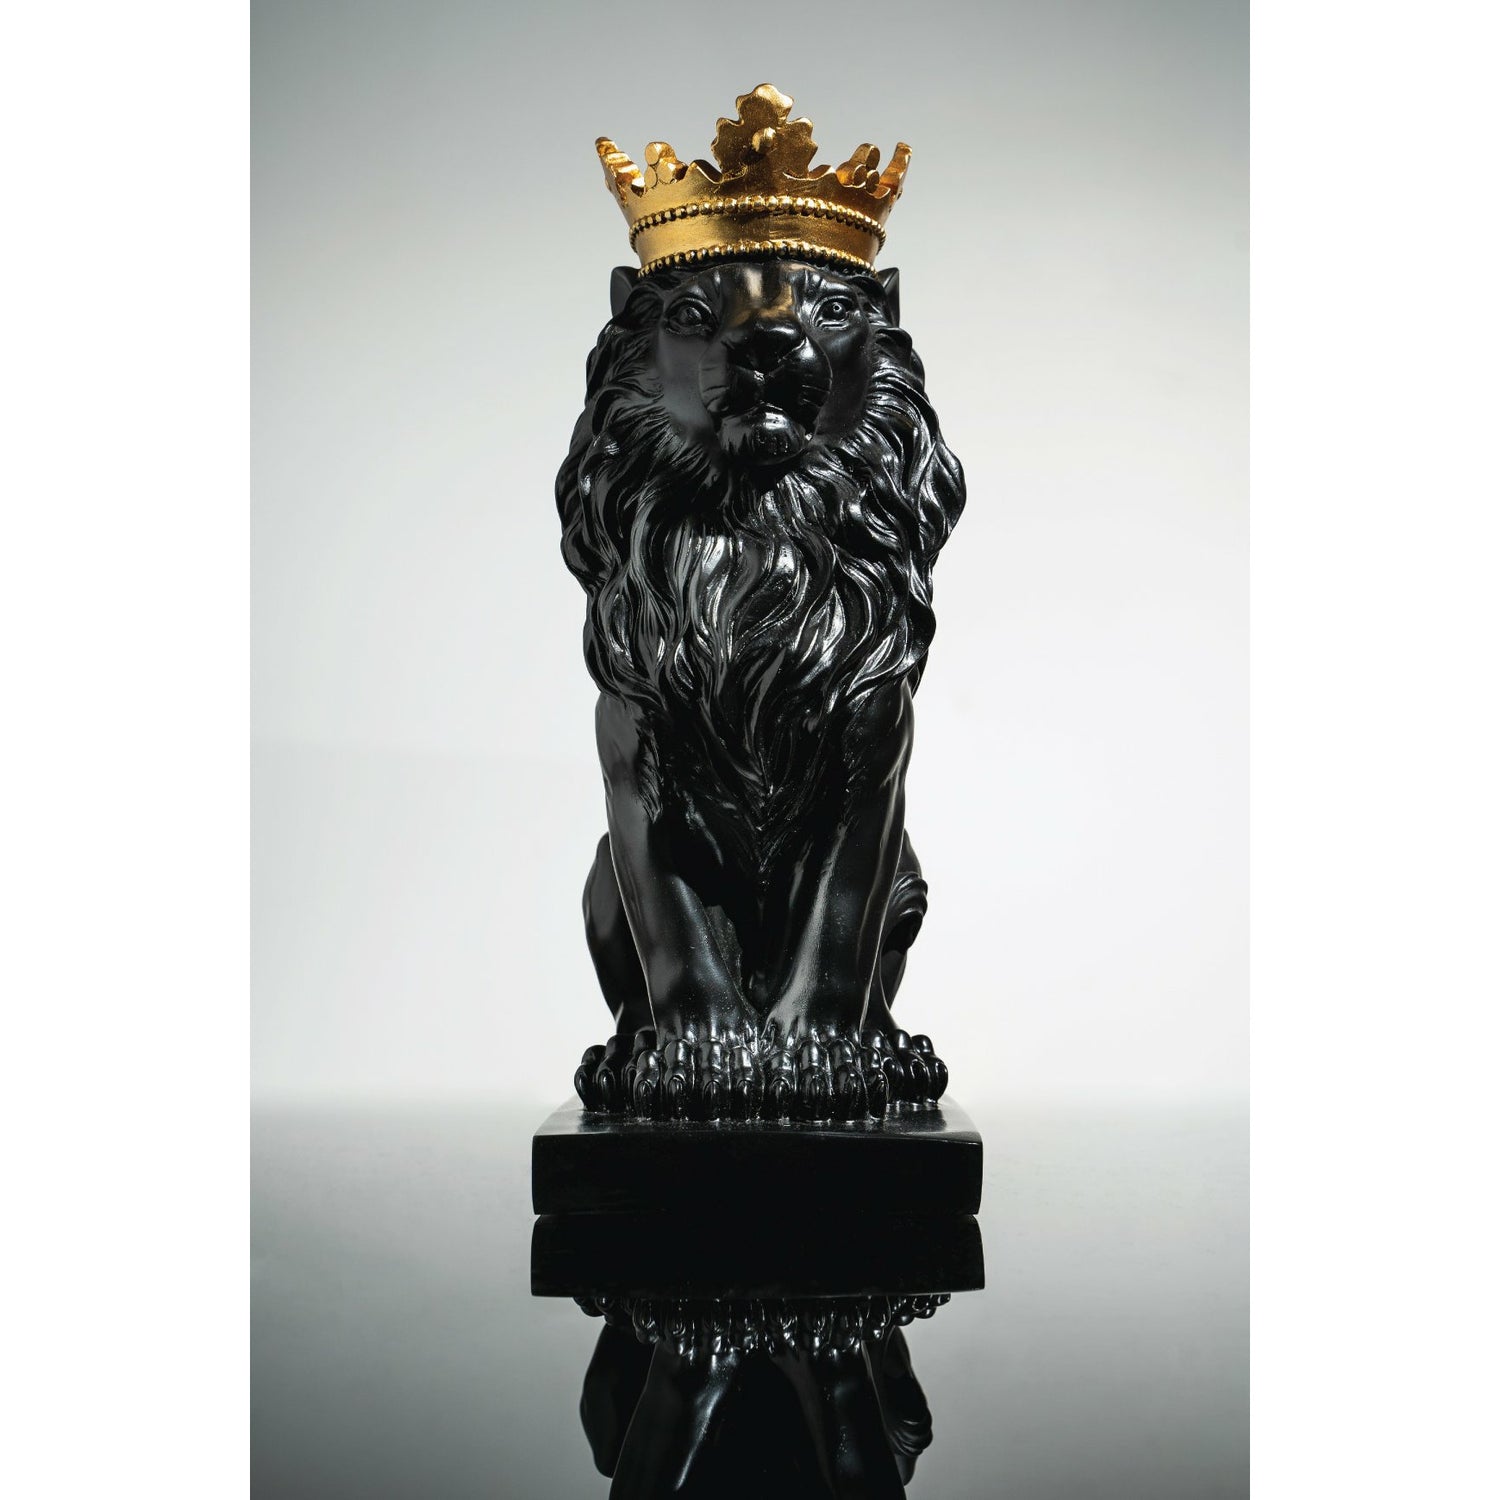 Black Lion Sculpture - Our Black & Gold Lion With Crown Sculpture is the perfect addition to any space.